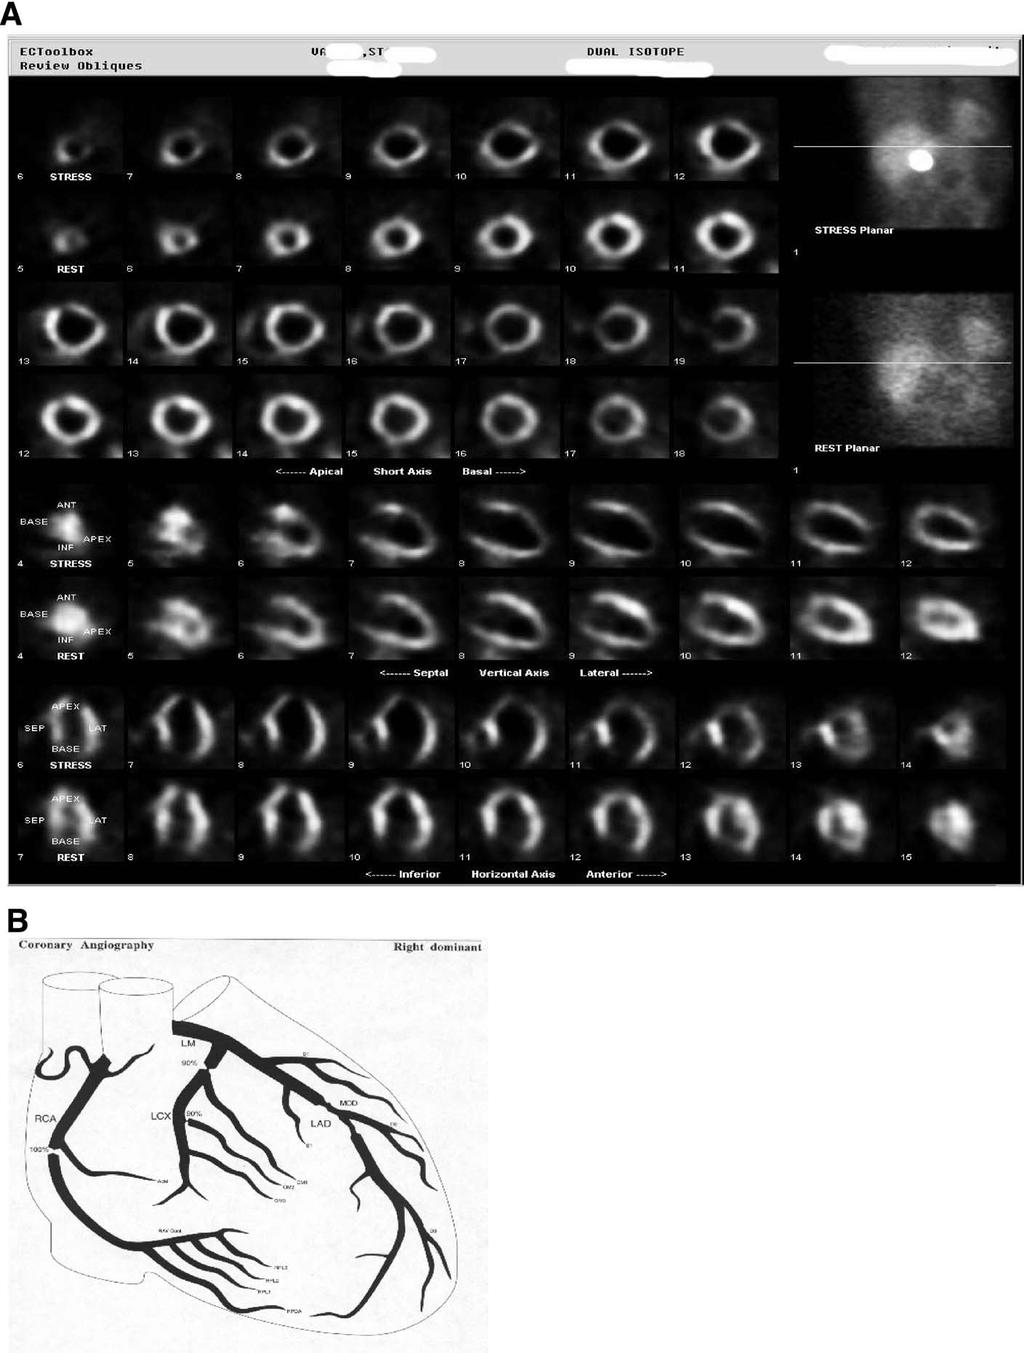 58 J.H. Mieres, D.R. Rosman, and L.J. Shaw Figure 6 (A) Case of a 66-year-old diabetic man with a history of an enlarged heart and no history of myocardial infarction who was admitted to the hospital